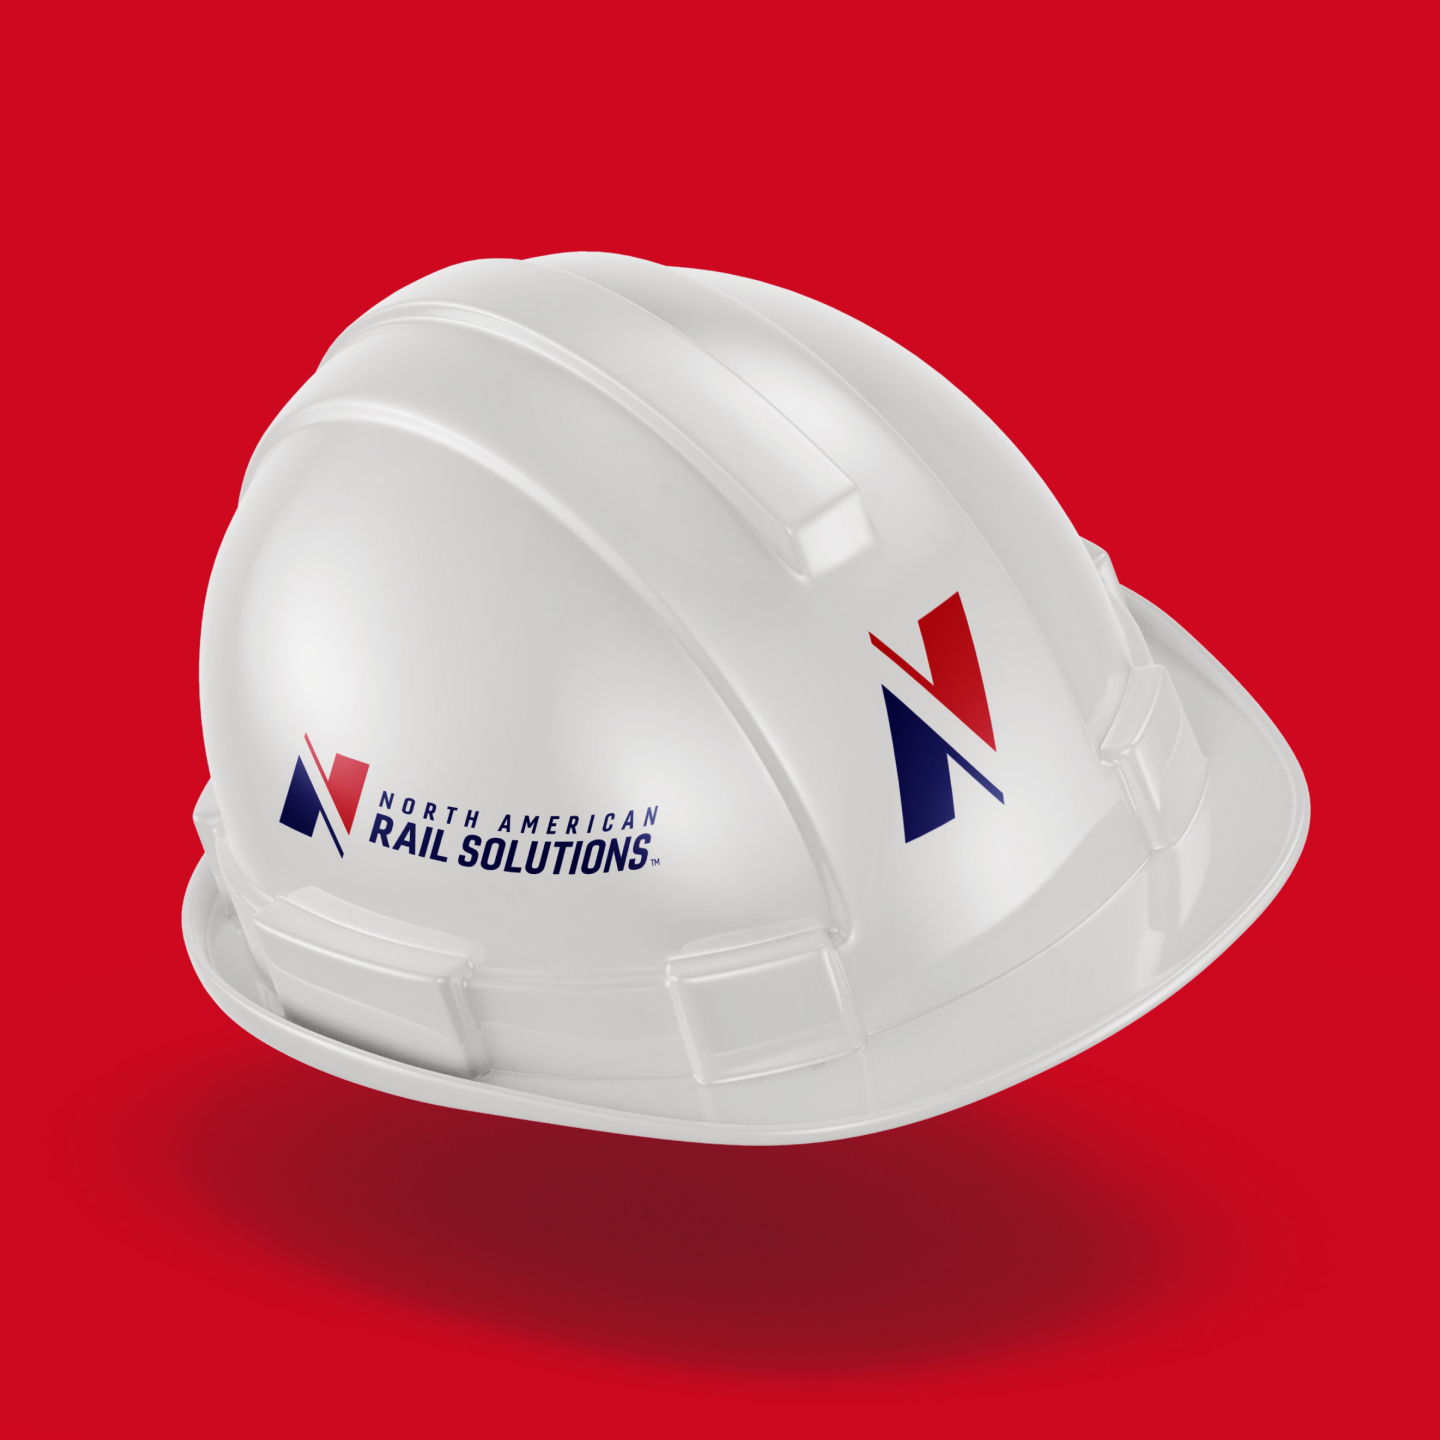 Bailey Brand Consulting designed the North American Rail Solution's Hard Hat